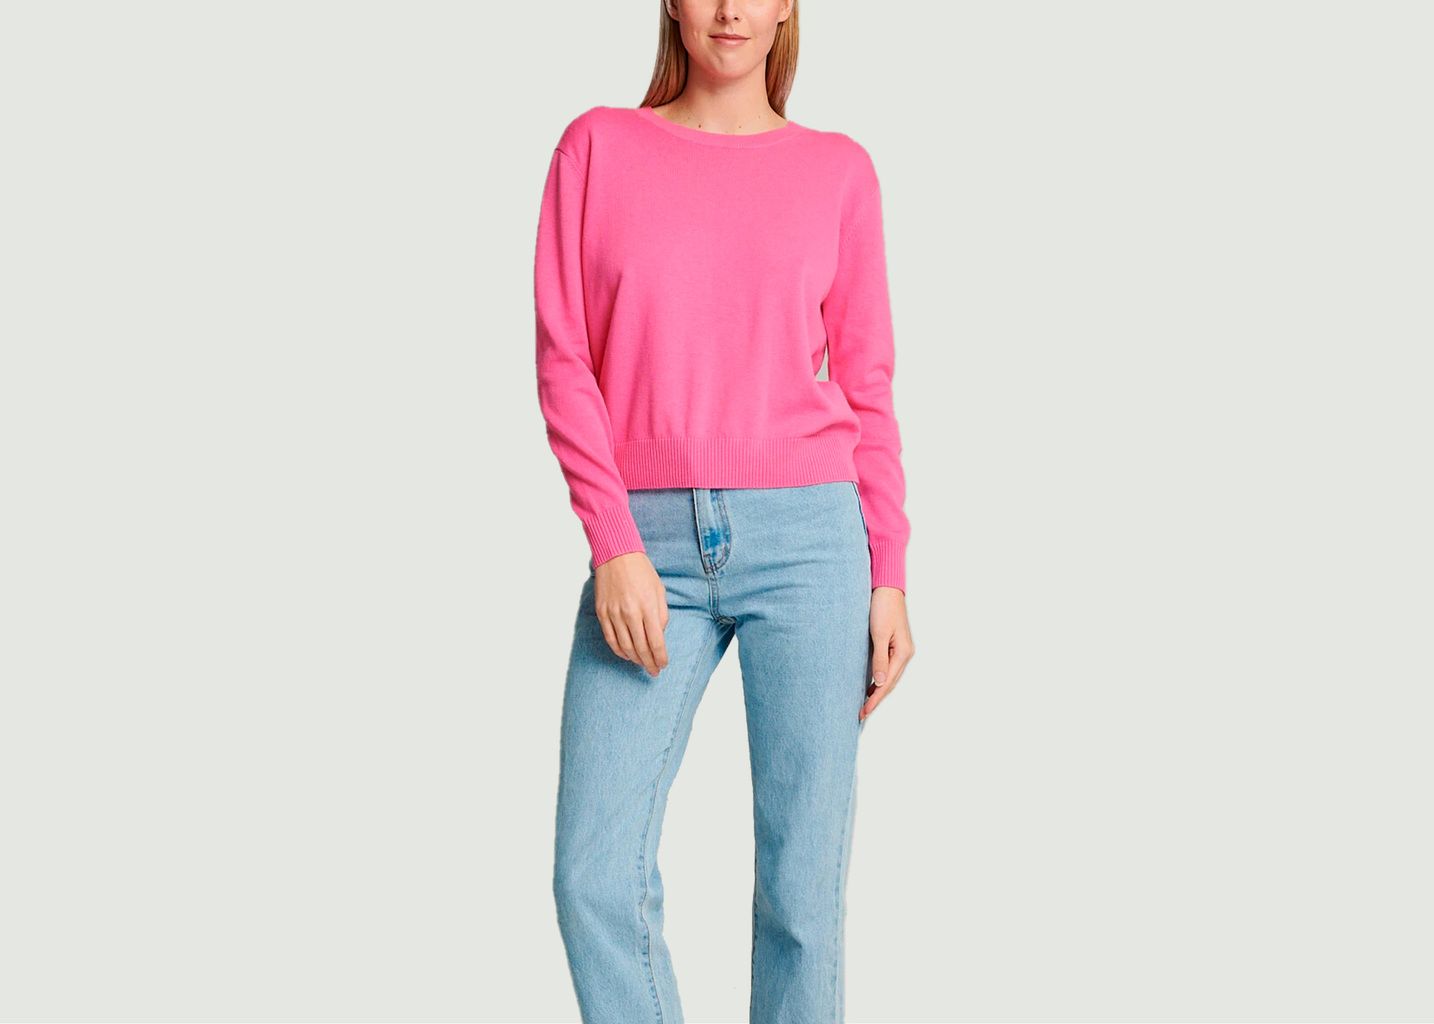 Absolut Cashmere Yvette Sweater